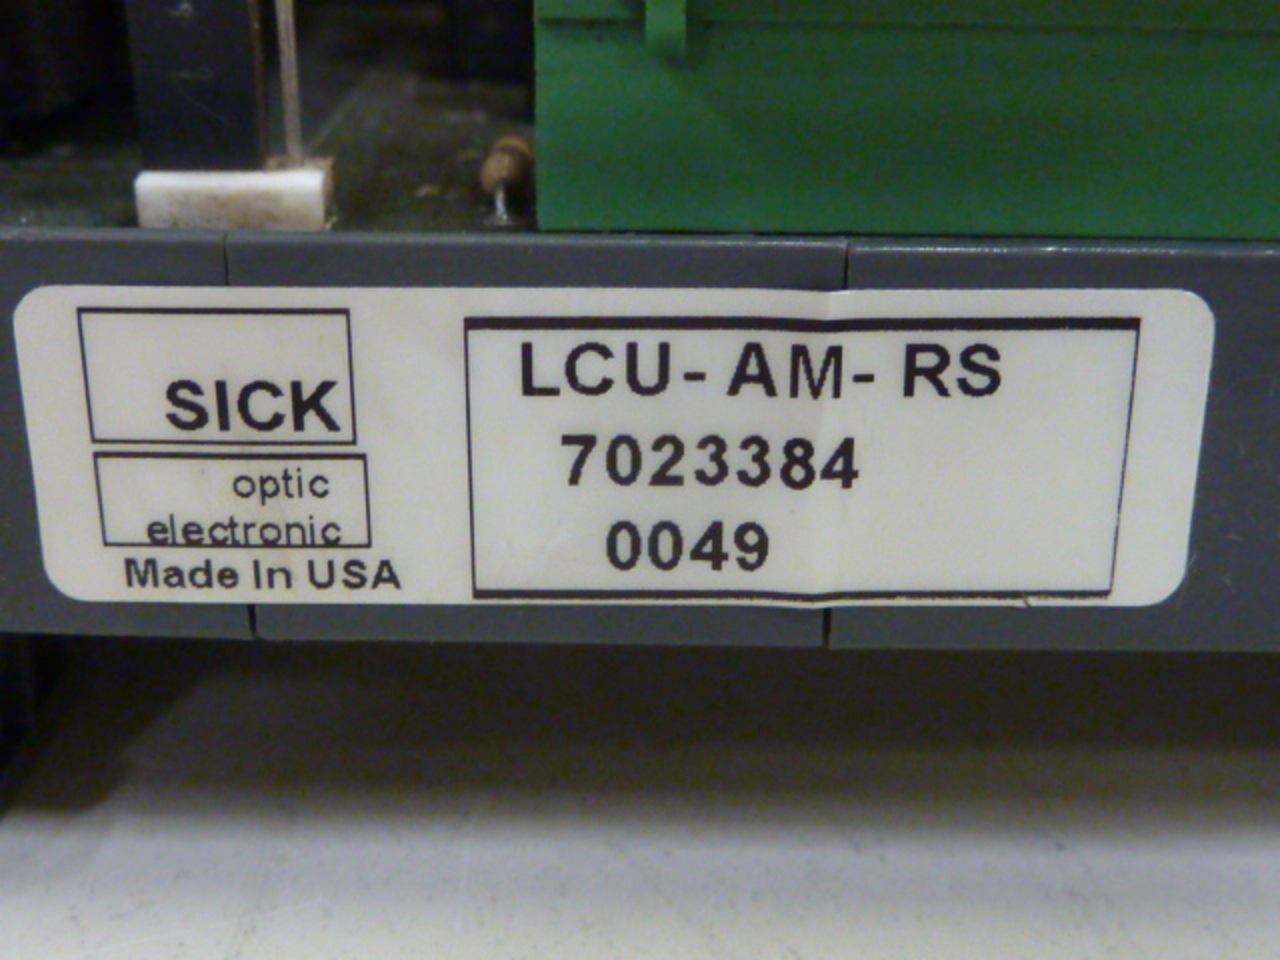 Details about   SICK OPTIC ELECTRONIC POWER SUPPLY RELAY BOARD LCU-AM-RS 